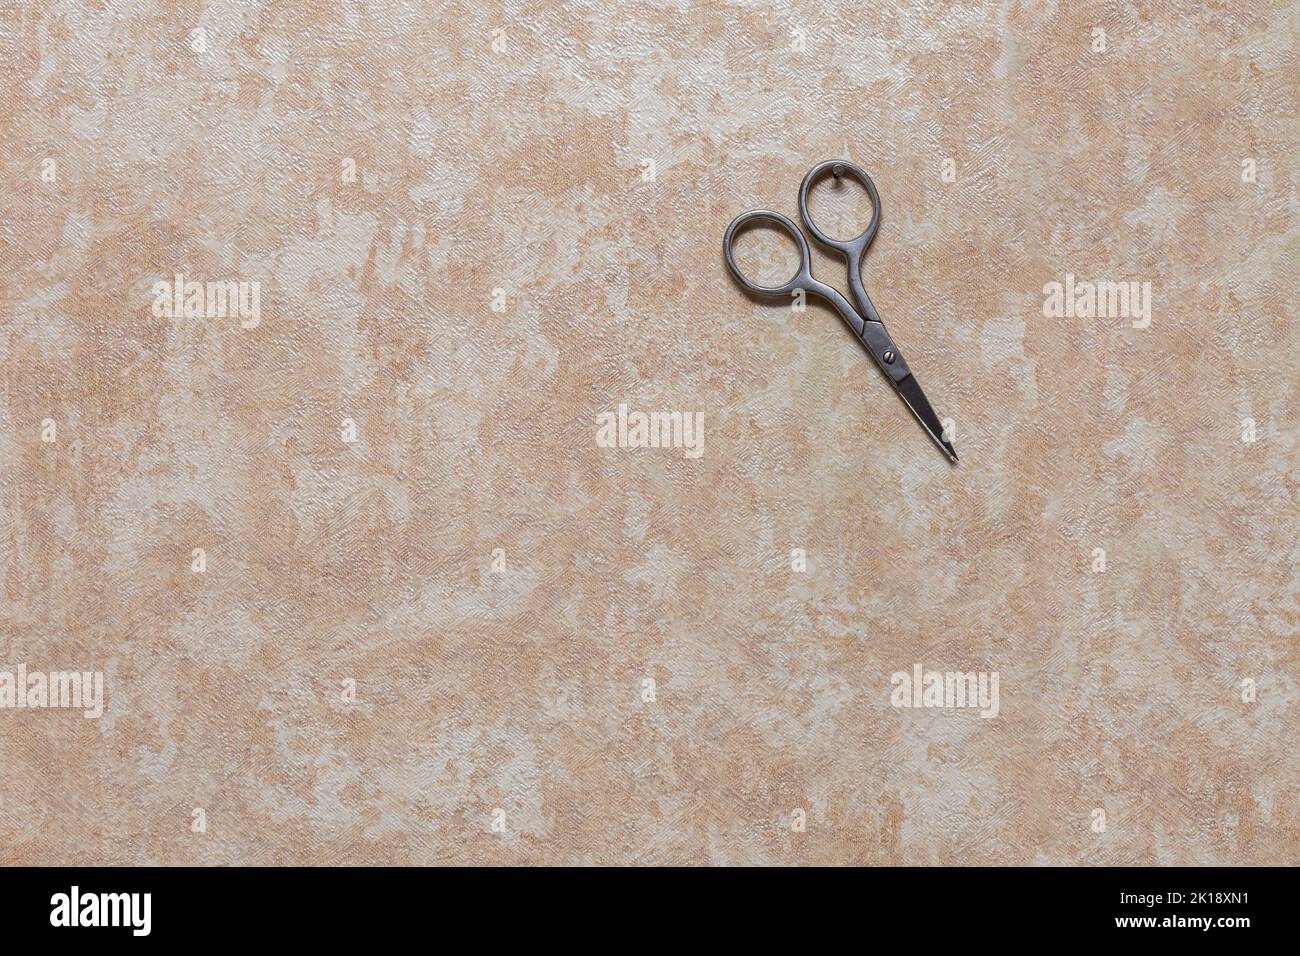 Manicure scissors hang on a small nail driven into the wall. Wall with wallpaper inside the house. Stock Photo